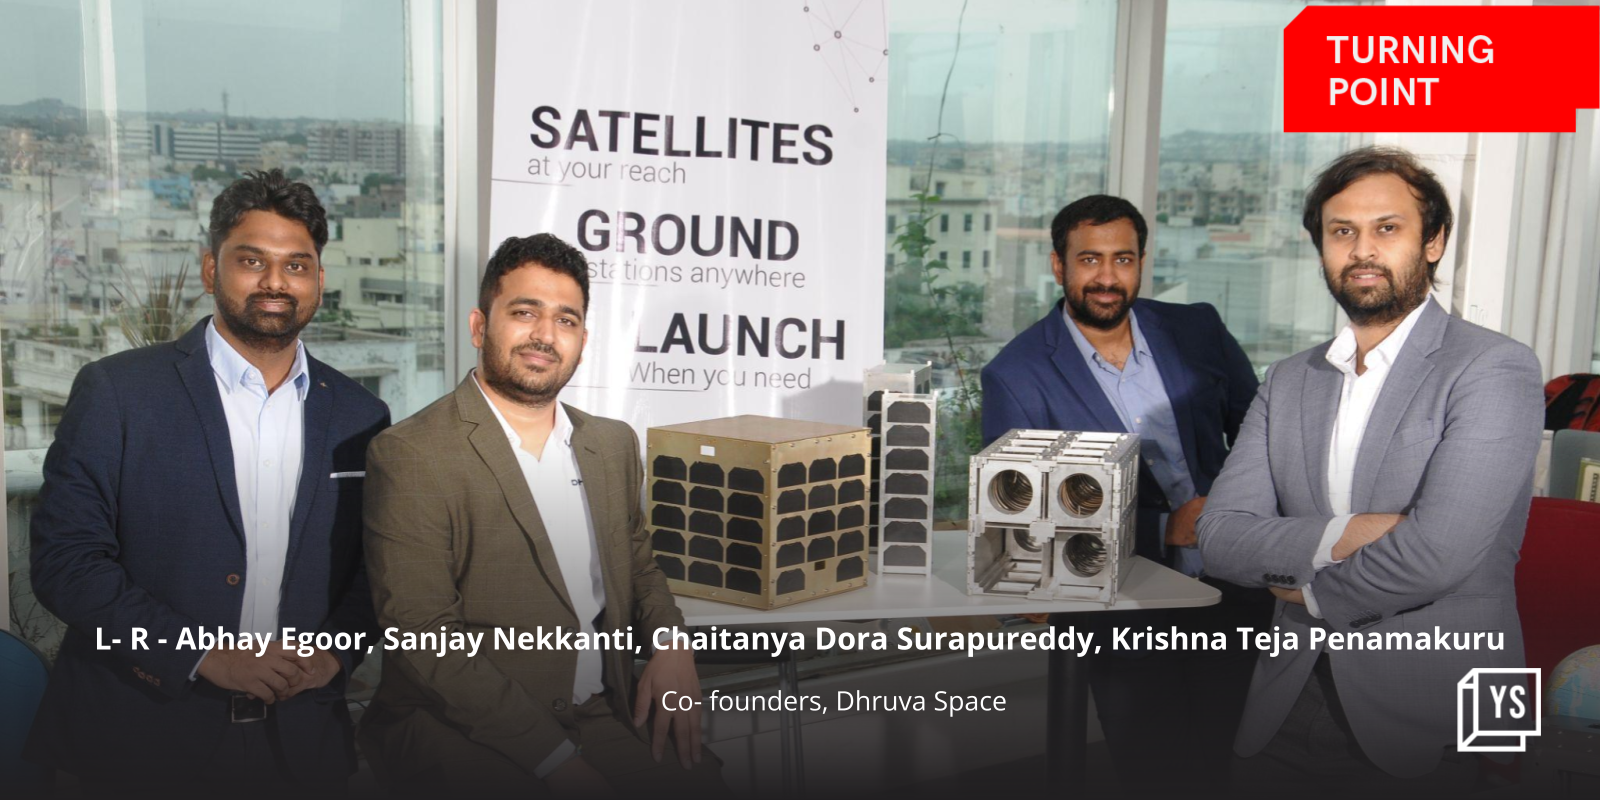 Dhruva Space was launched to establish India as a global satellite hub